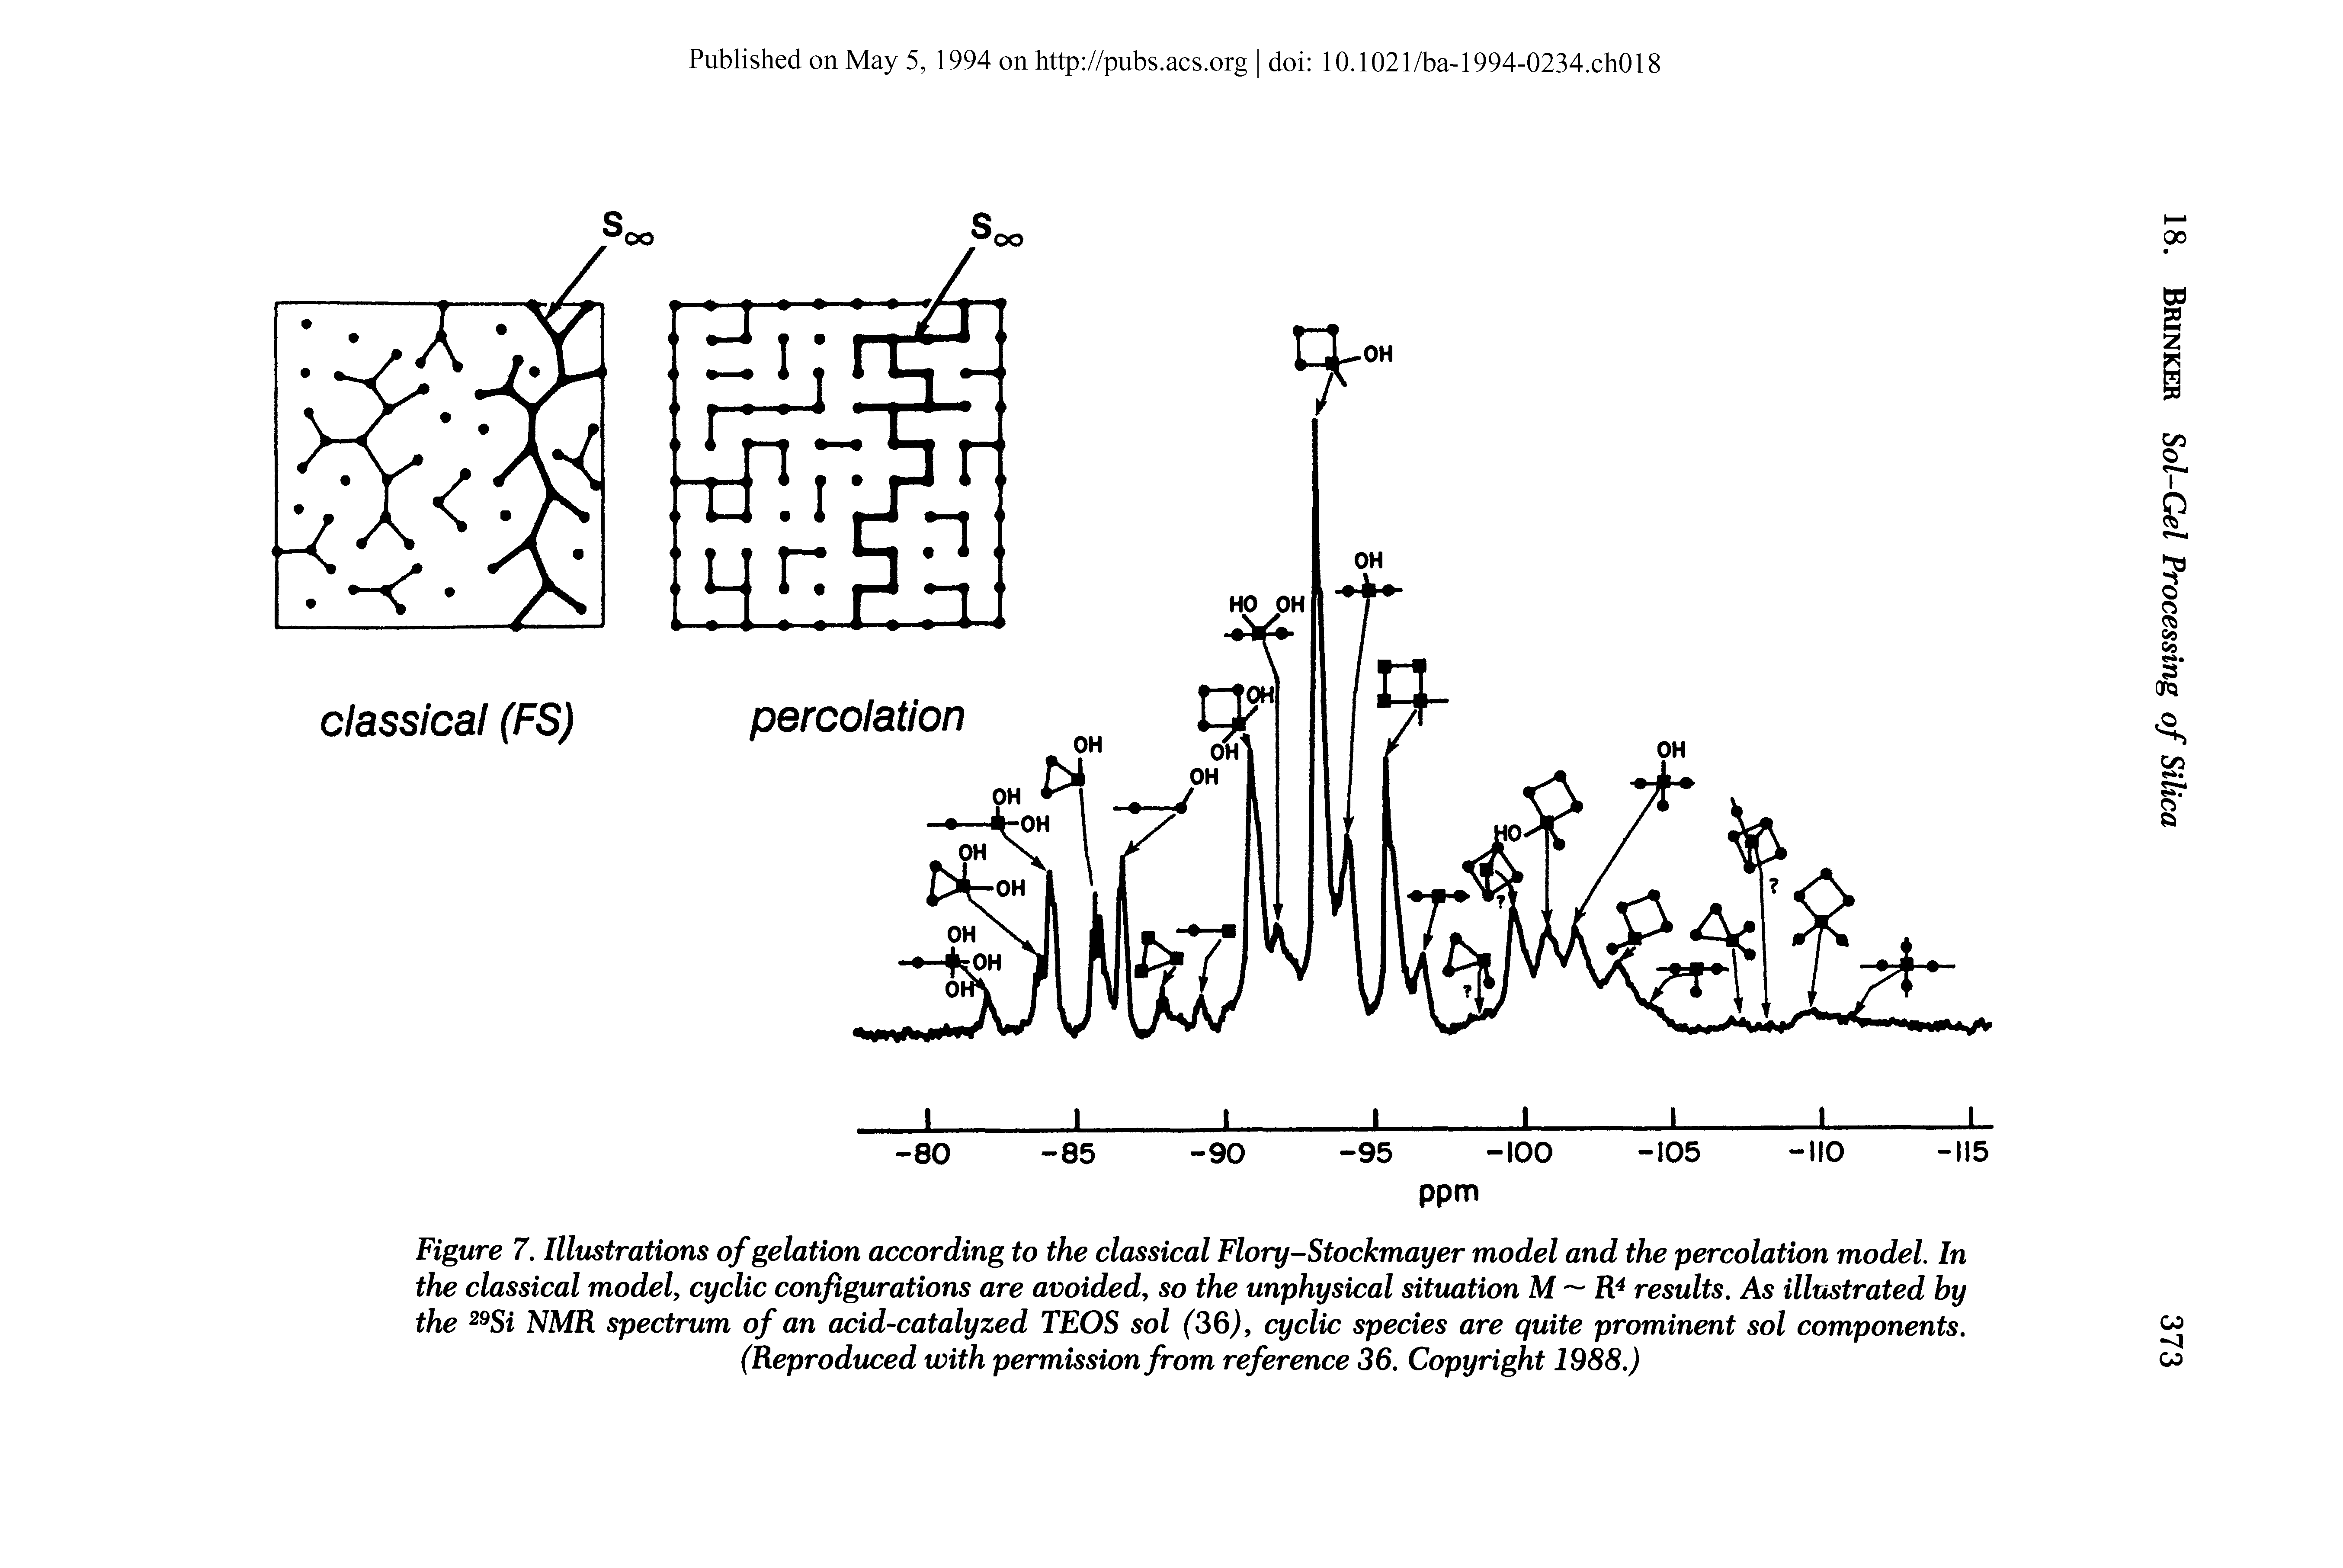 Figure 7. Illustrations of gelation according to the classical Flory-Stockmayer model and the percolation model. In the classical model, cyclic configurations are avoided, so the unphysical situation M R4 results. As illustrated by the 29Si NMR spectrum of an acid-catalyzed TEOS sol (36), cyclic species are quite prominent sol components. (Reproduced with permission from reference 36. Copyright 1988.)...